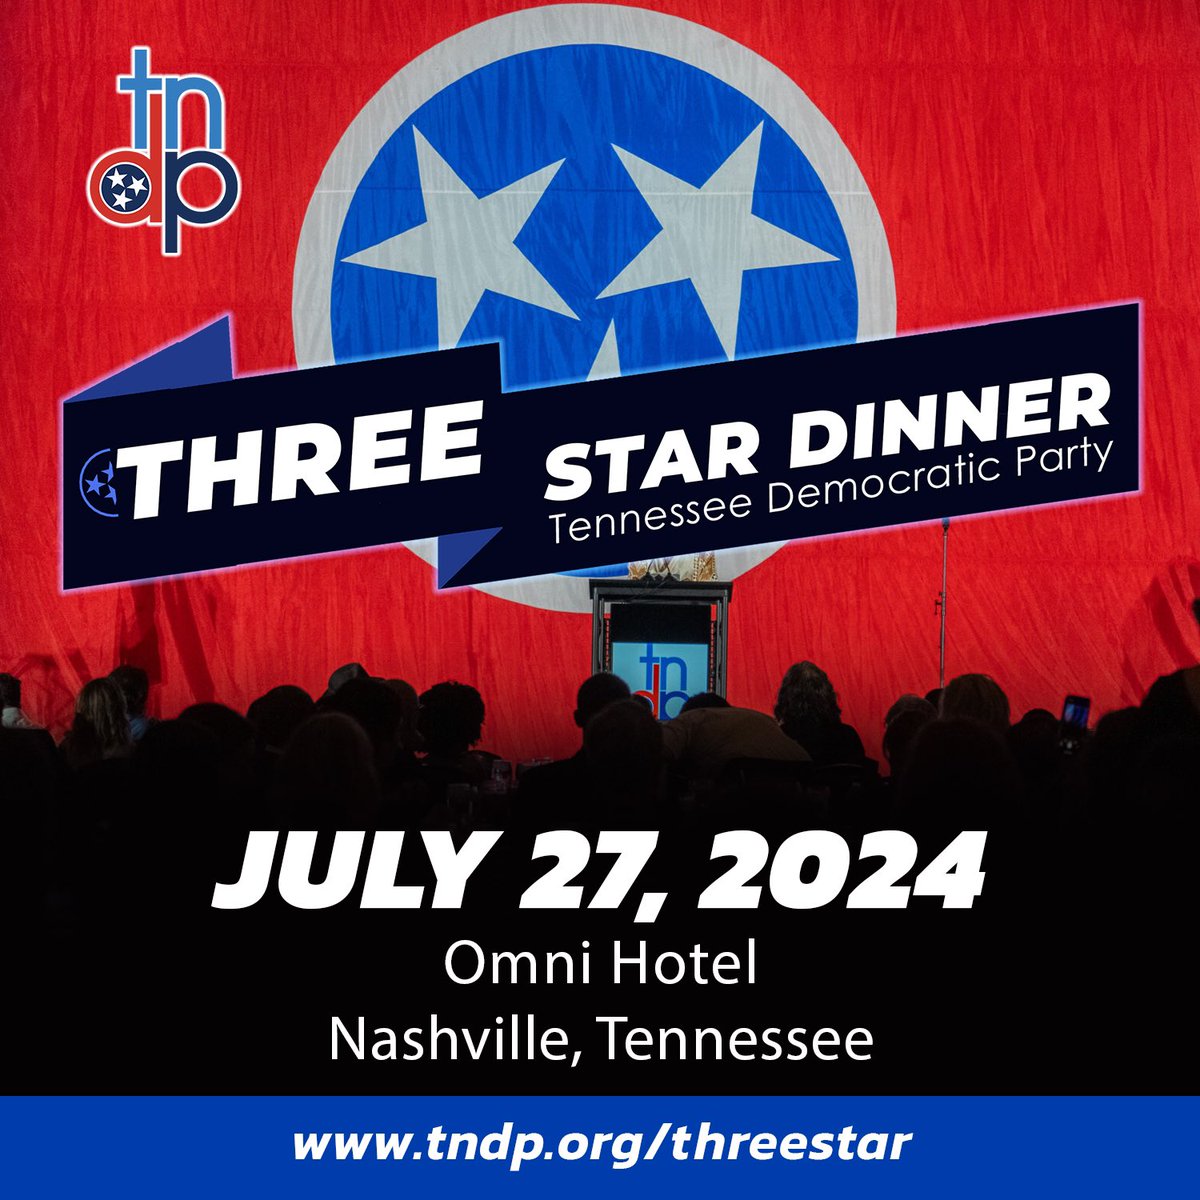 SAVE THE DATE: Our annual Three Star Dinner will be held on July 27, 2024 in Nashville, TN. Don’t miss this year’s dinner. Tickets, tables, and ads can be purchased right now! tndp.org/threestar